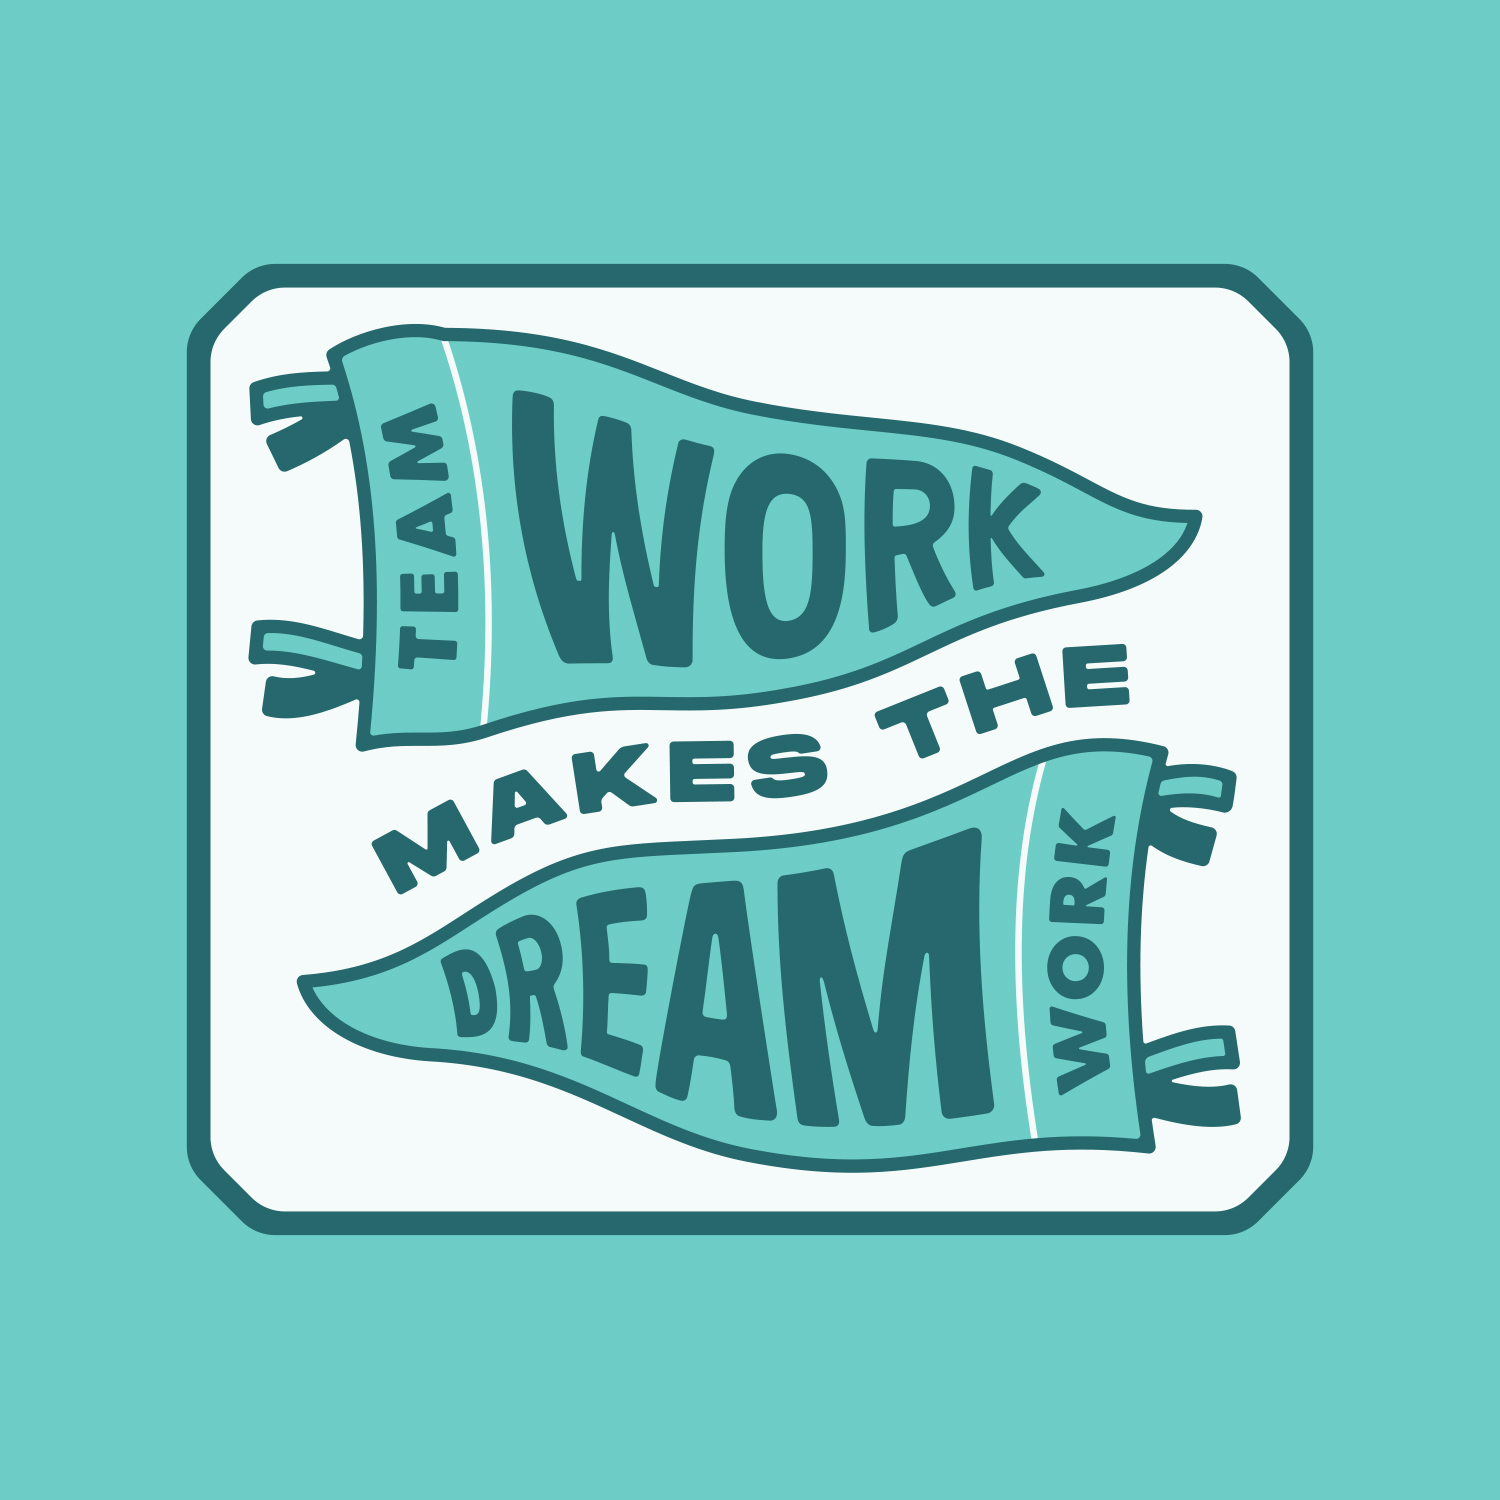 Badge with phrase "teamwork makes the dream work"